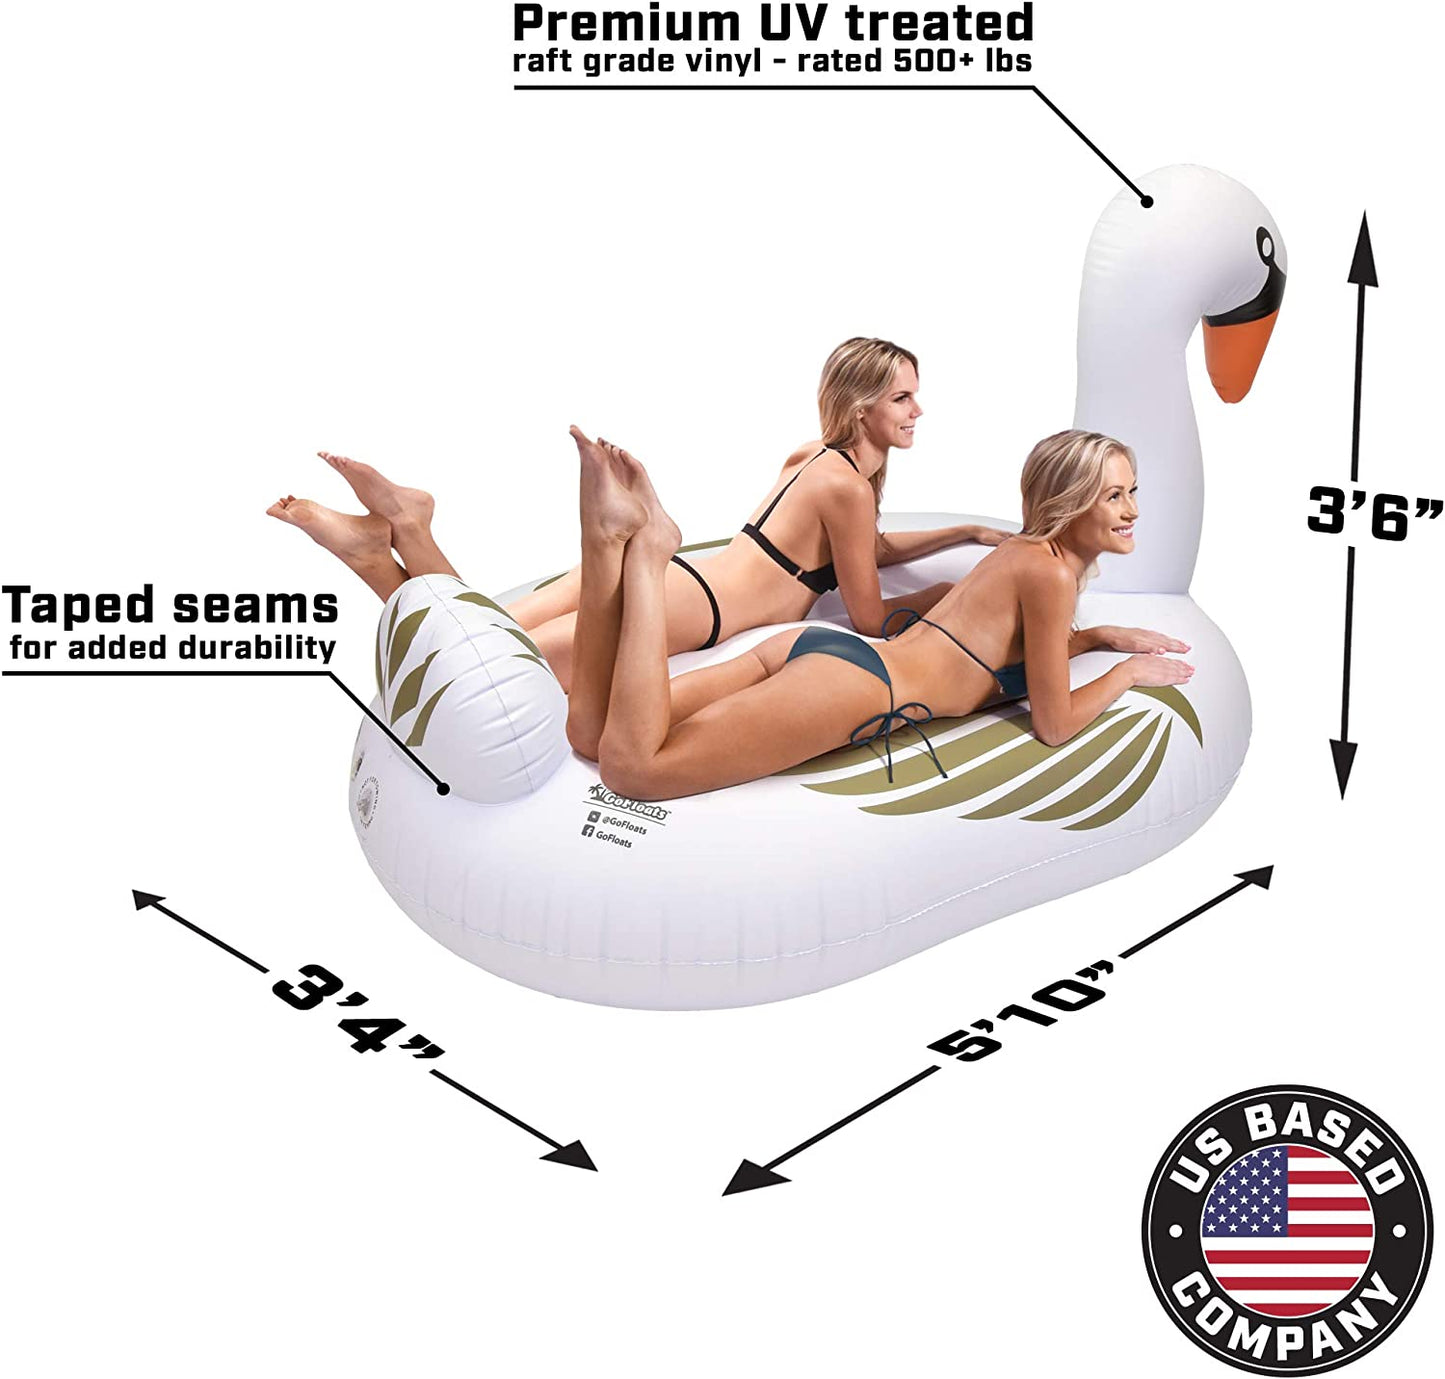 Giant Inflatable Pool Floats - Choose Unicorn, Dragon, Flamingo, Swan, or Bull - Includes Drink Float